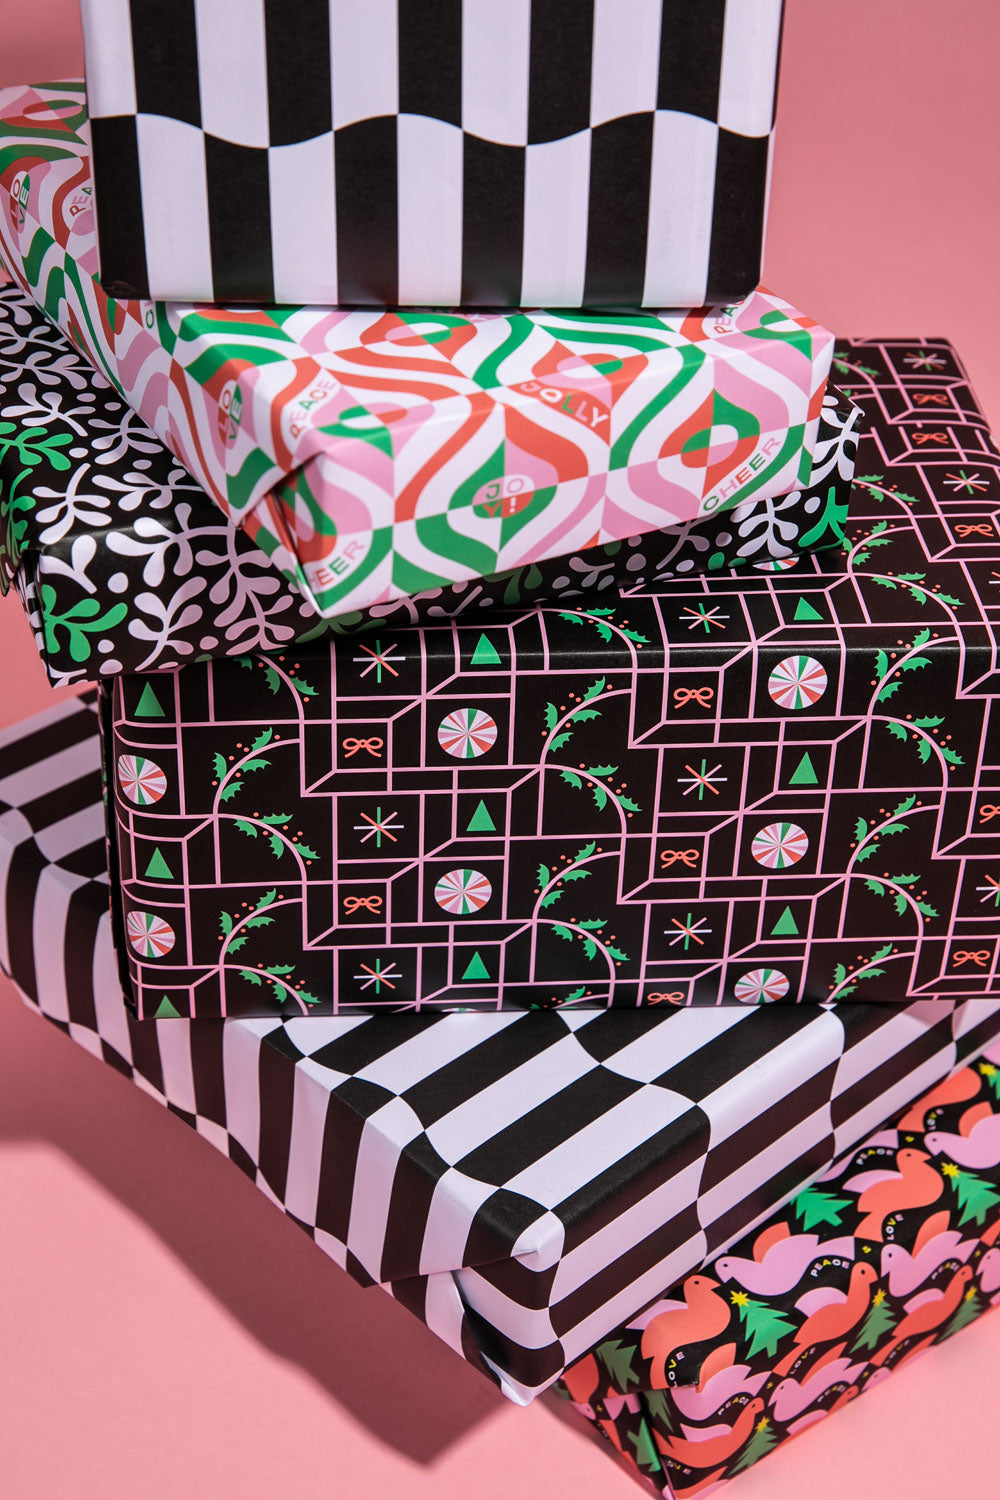 Stack of presents wrapped in mid-century inspired Christmas wrapping paper with abstract patterns and holiday illustrations.